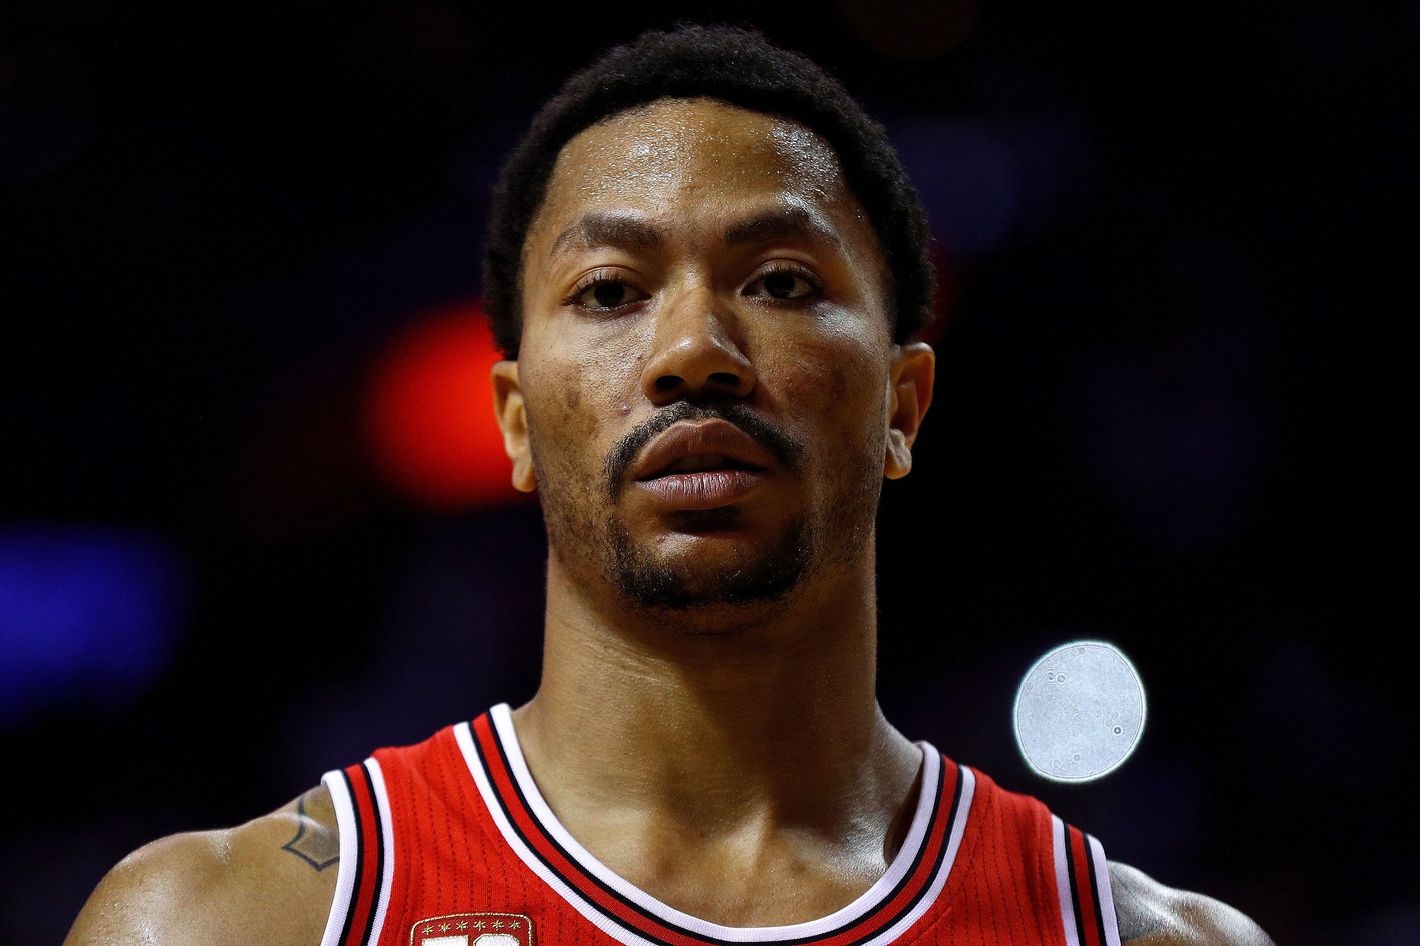 Woman Who Accused Derrick Rose Of Gang Rape Speaks Out